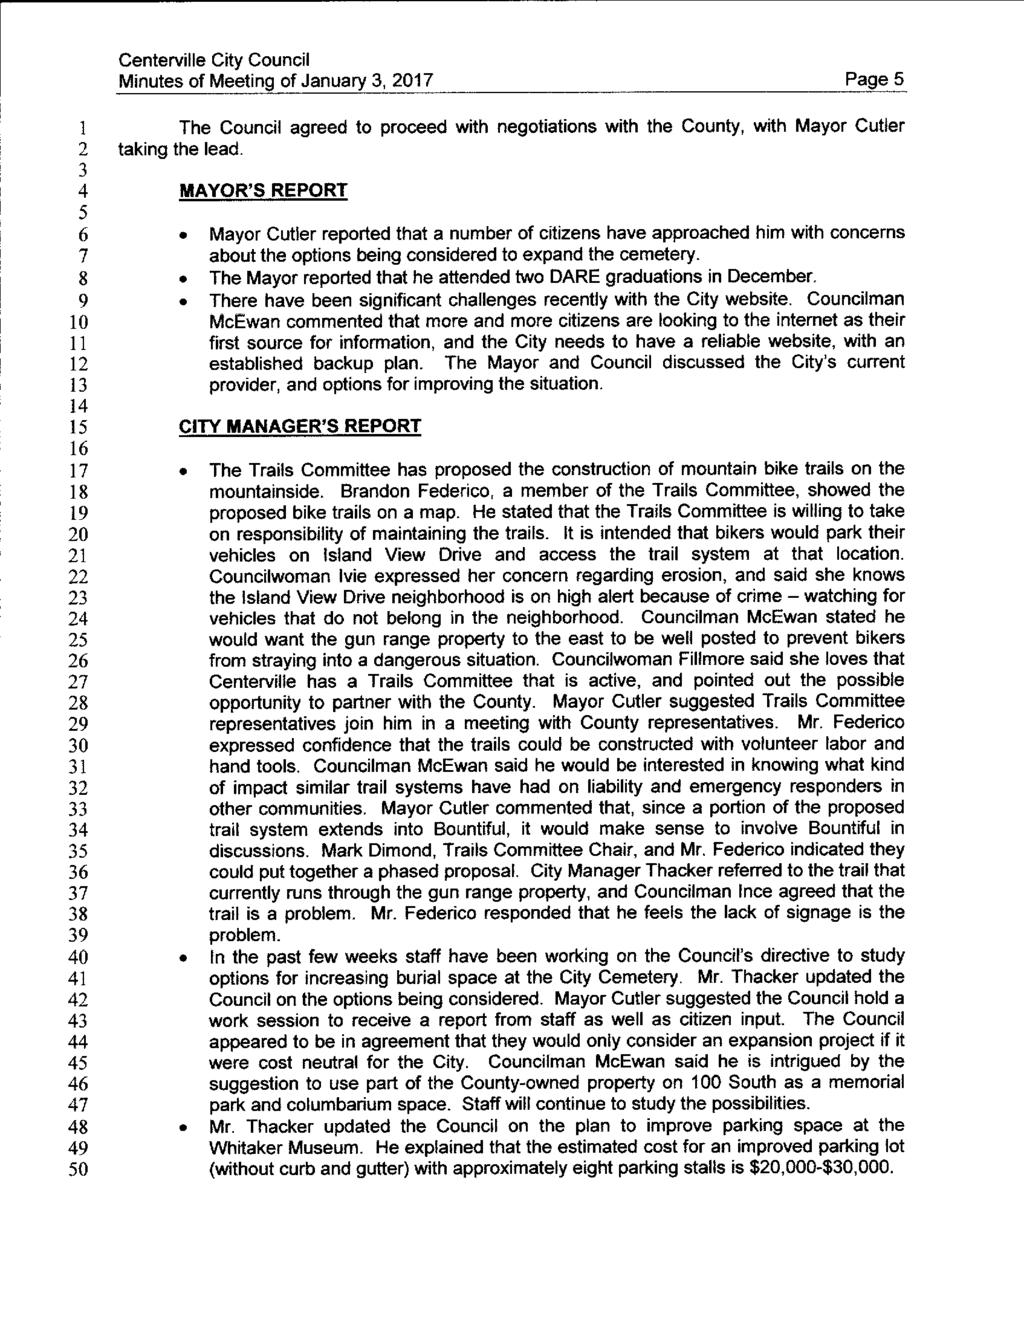 Minutes of Meeting of January, 01 Page 1 1 1 1 1 1 1 1 1 0 1 0 1 0 1 0 The Council agreed to proceed with negotiations with the County, with Mayor Cutler taking the lead.